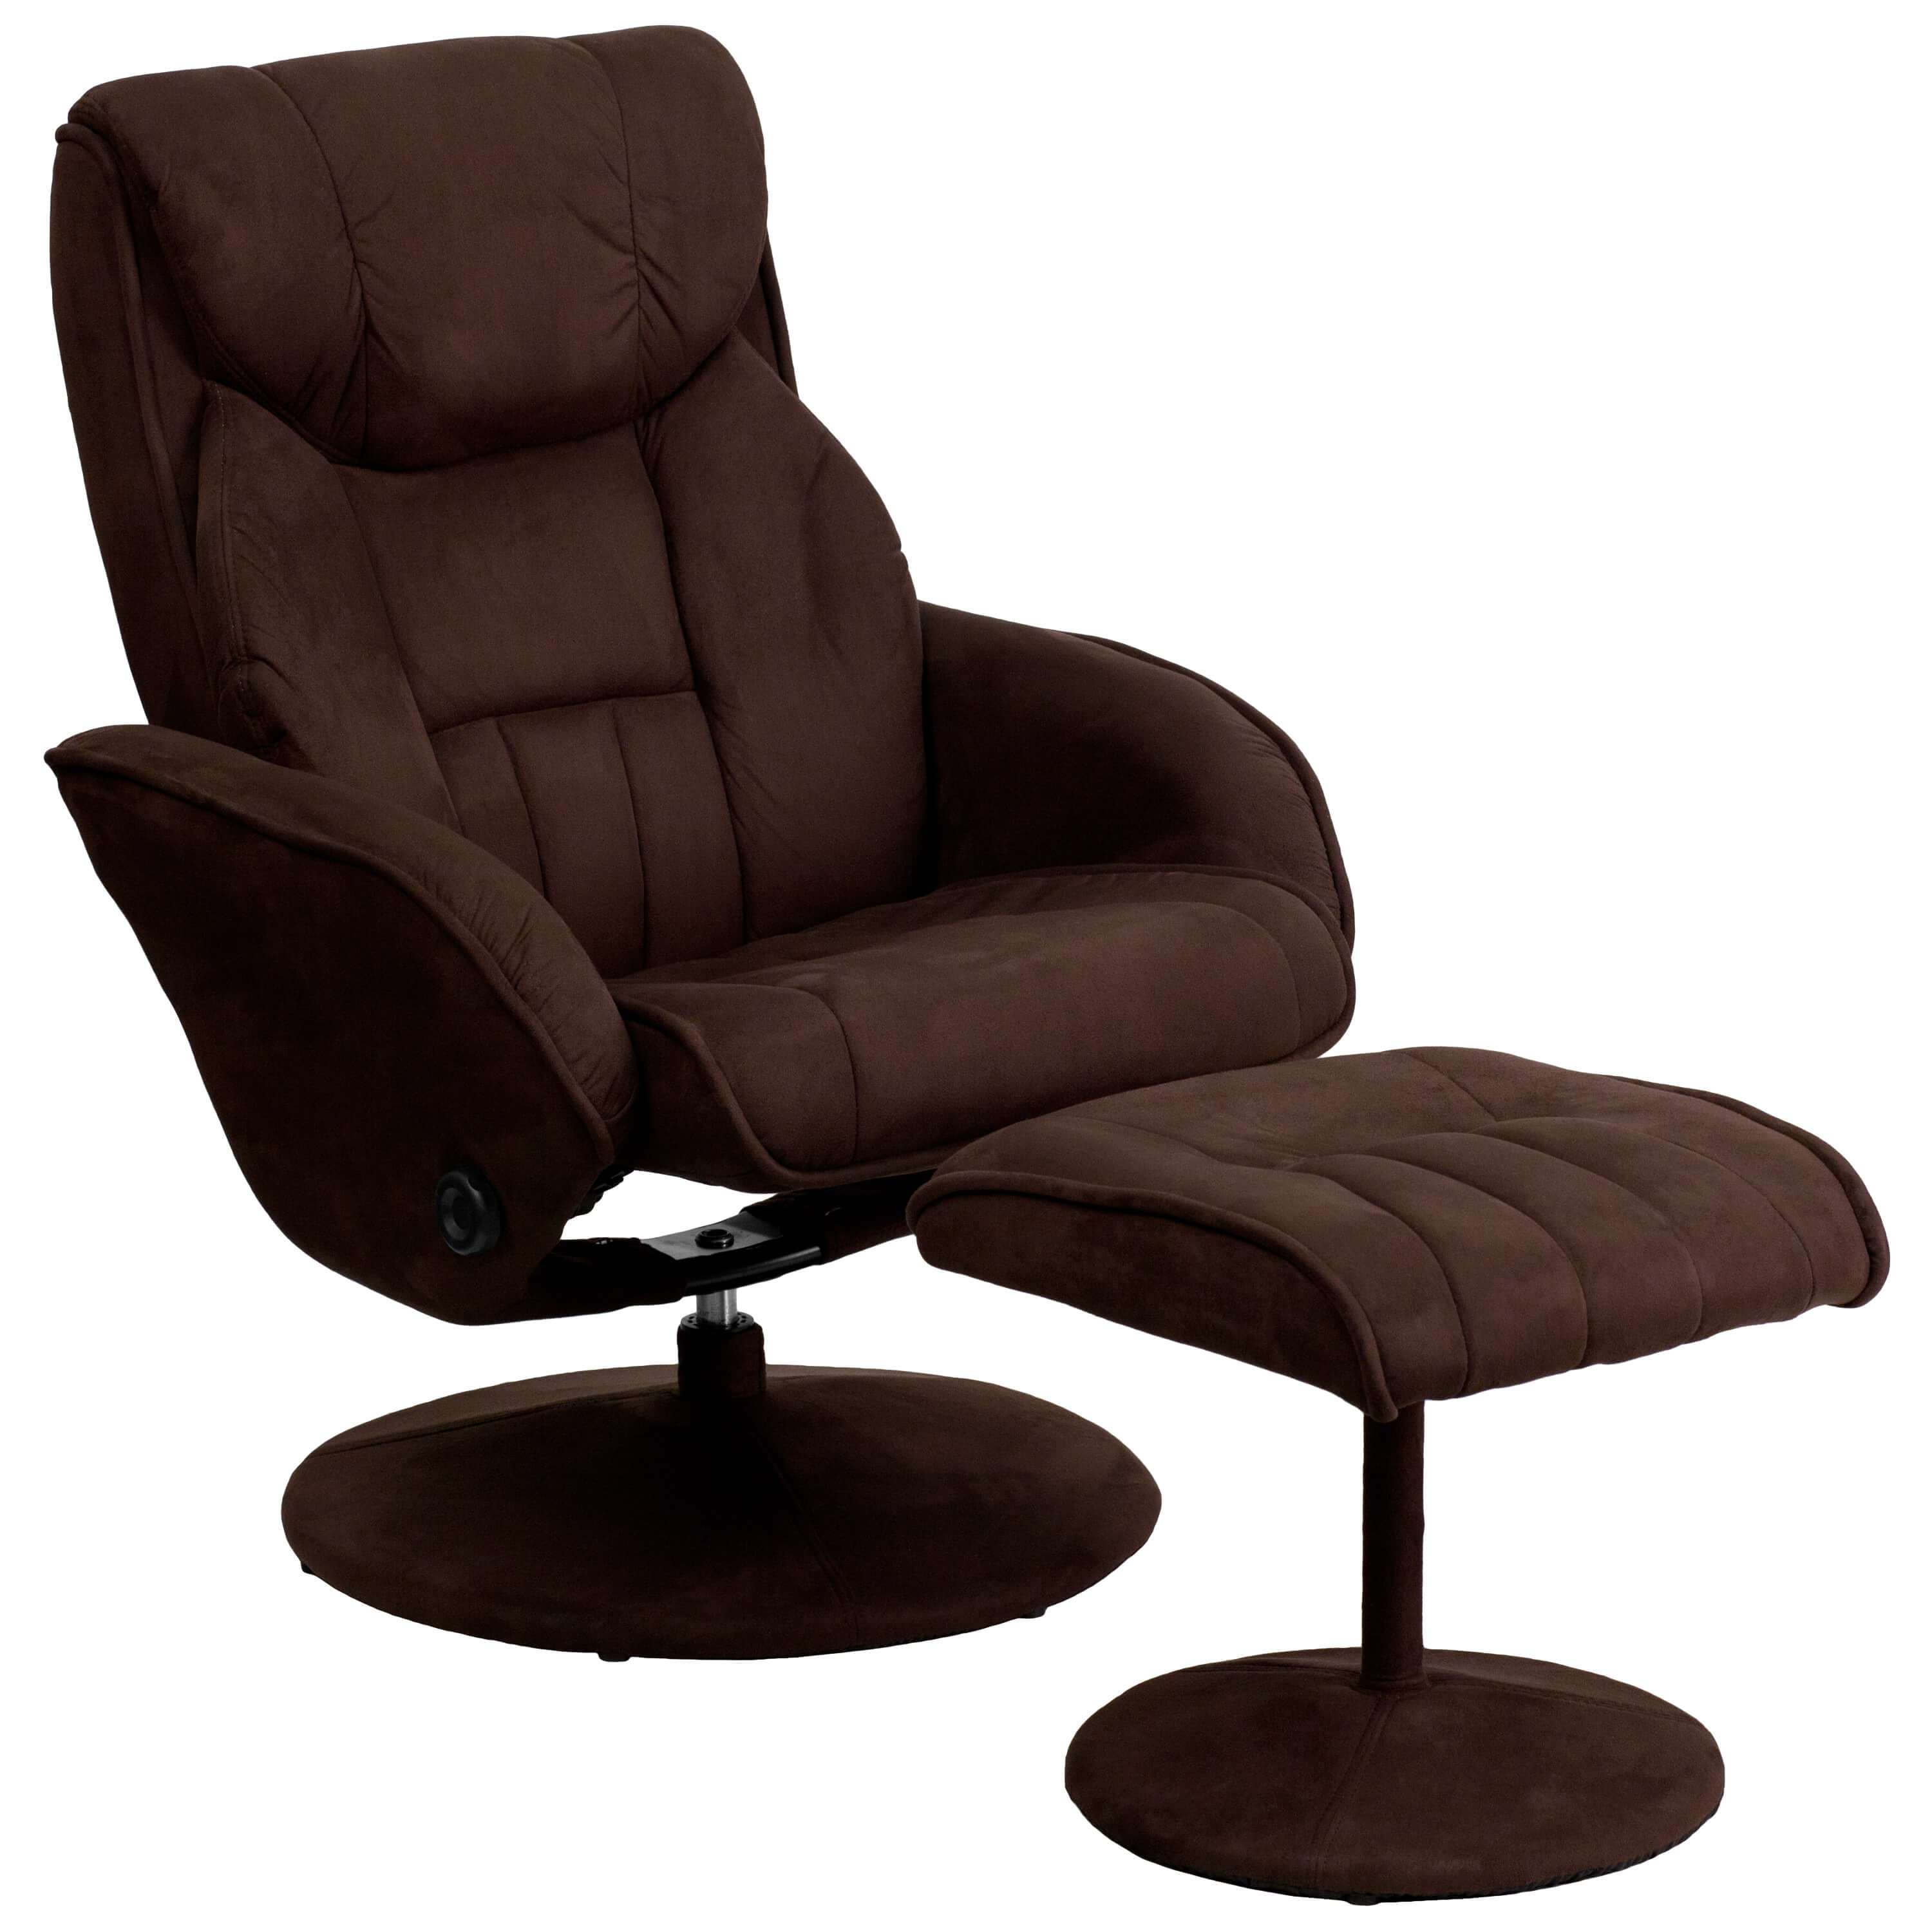 contemporary-recliners-brown-recliner-chair.jpg